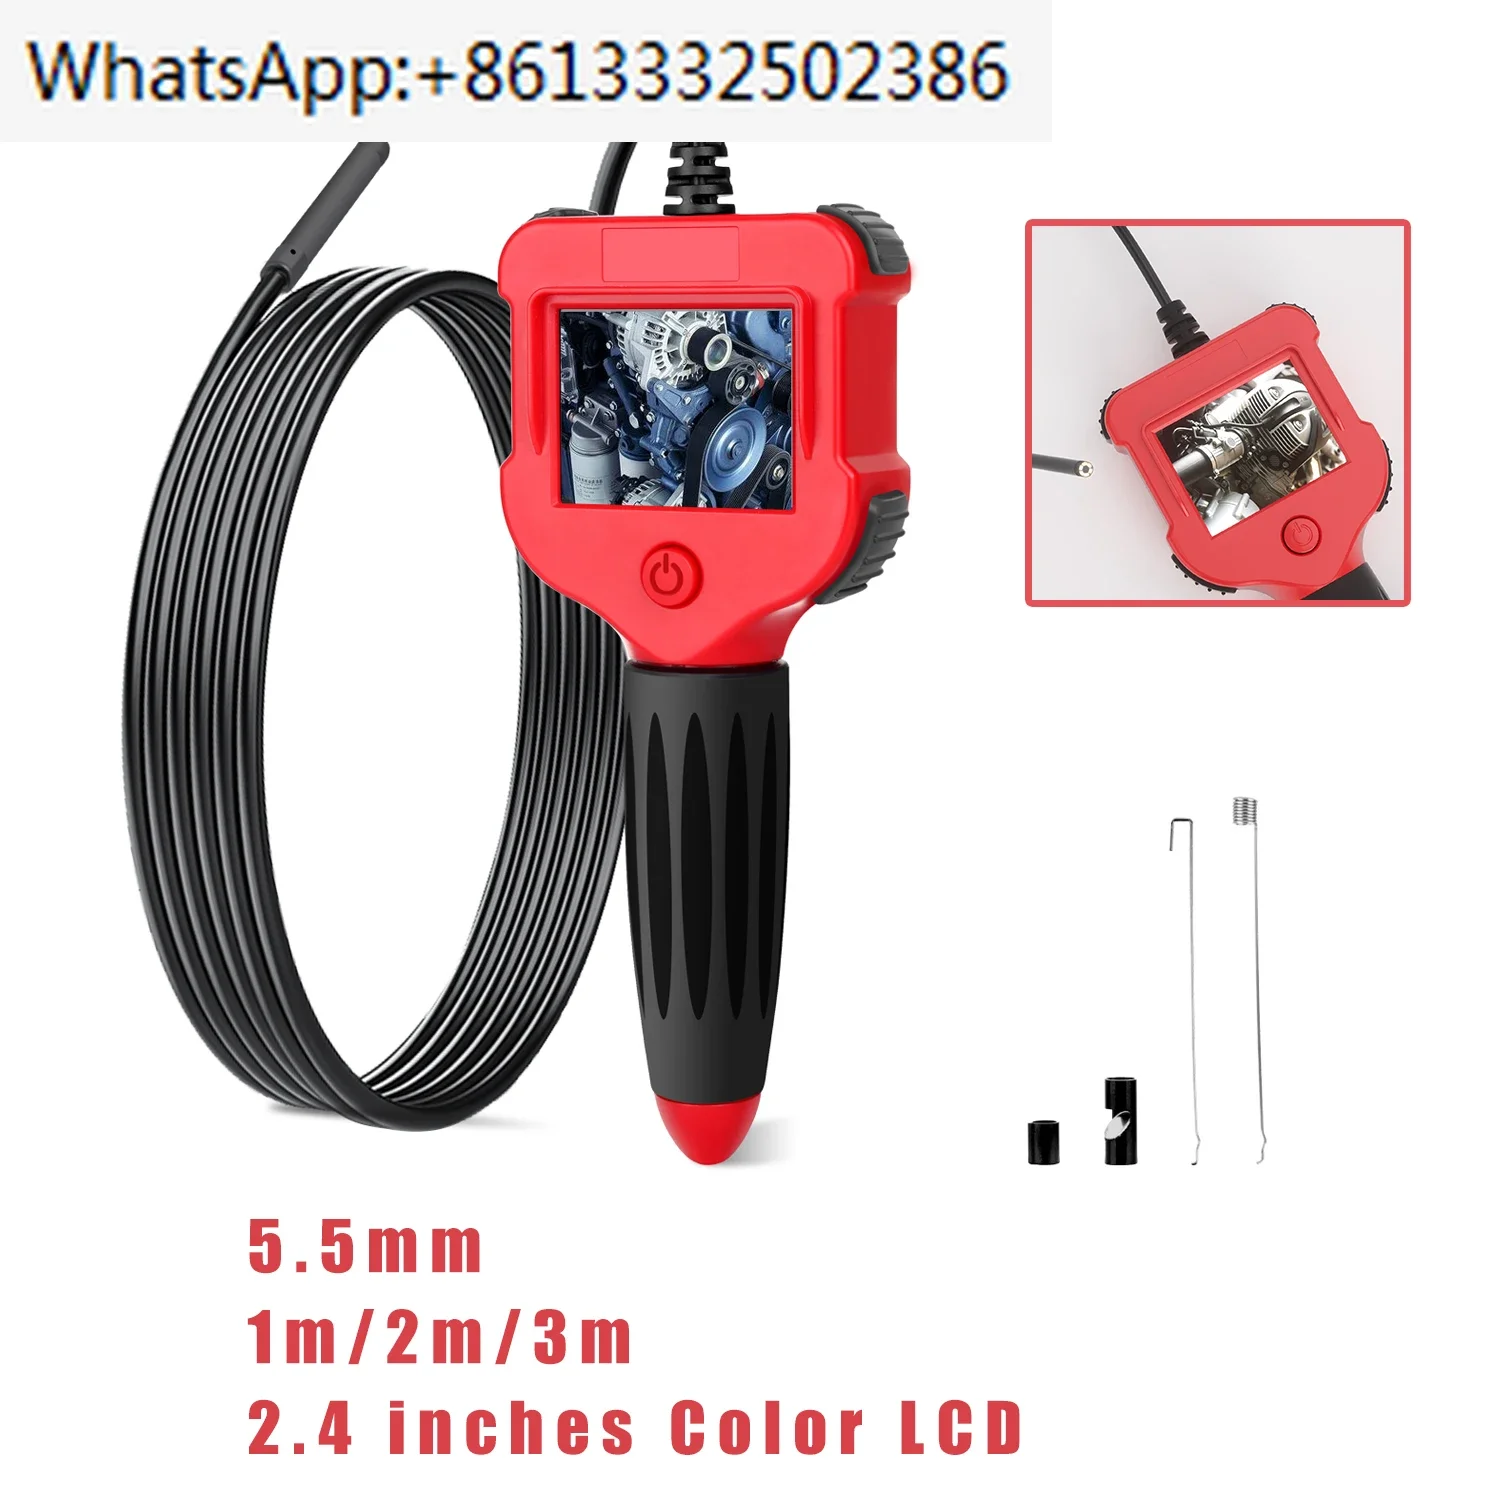 

NK-SC1 Professional Endoscope for Cars Handheld 2.4 Inches Industrial Snake Borescope Video Inspection Camera